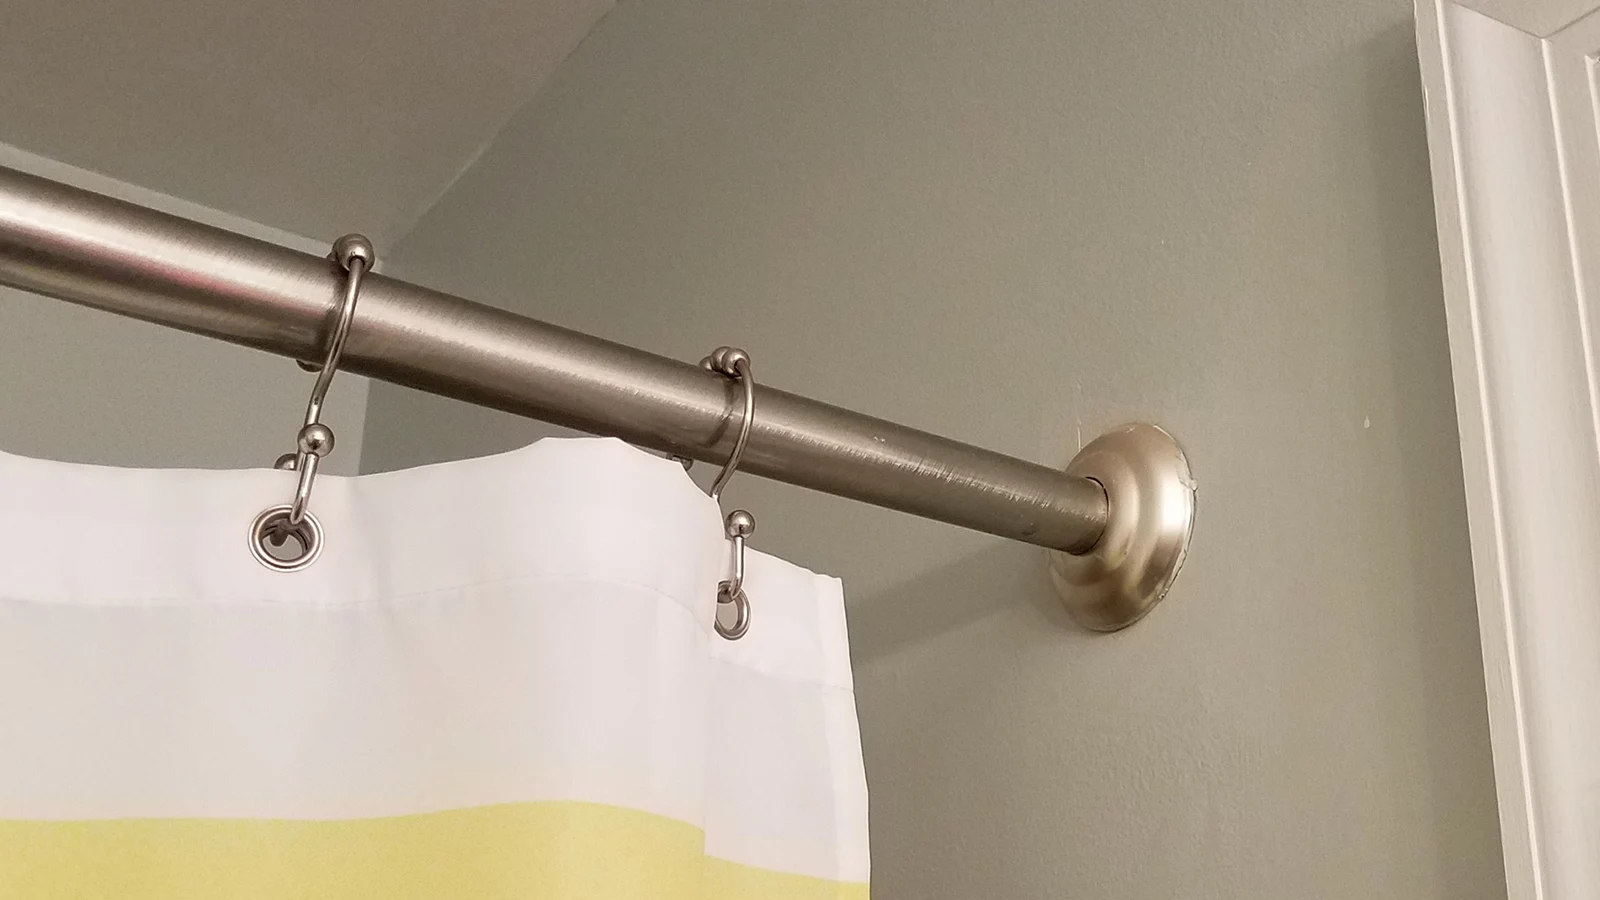 Types of Shower Curtain Hooks: A shower curtain hanging on a metal rod.